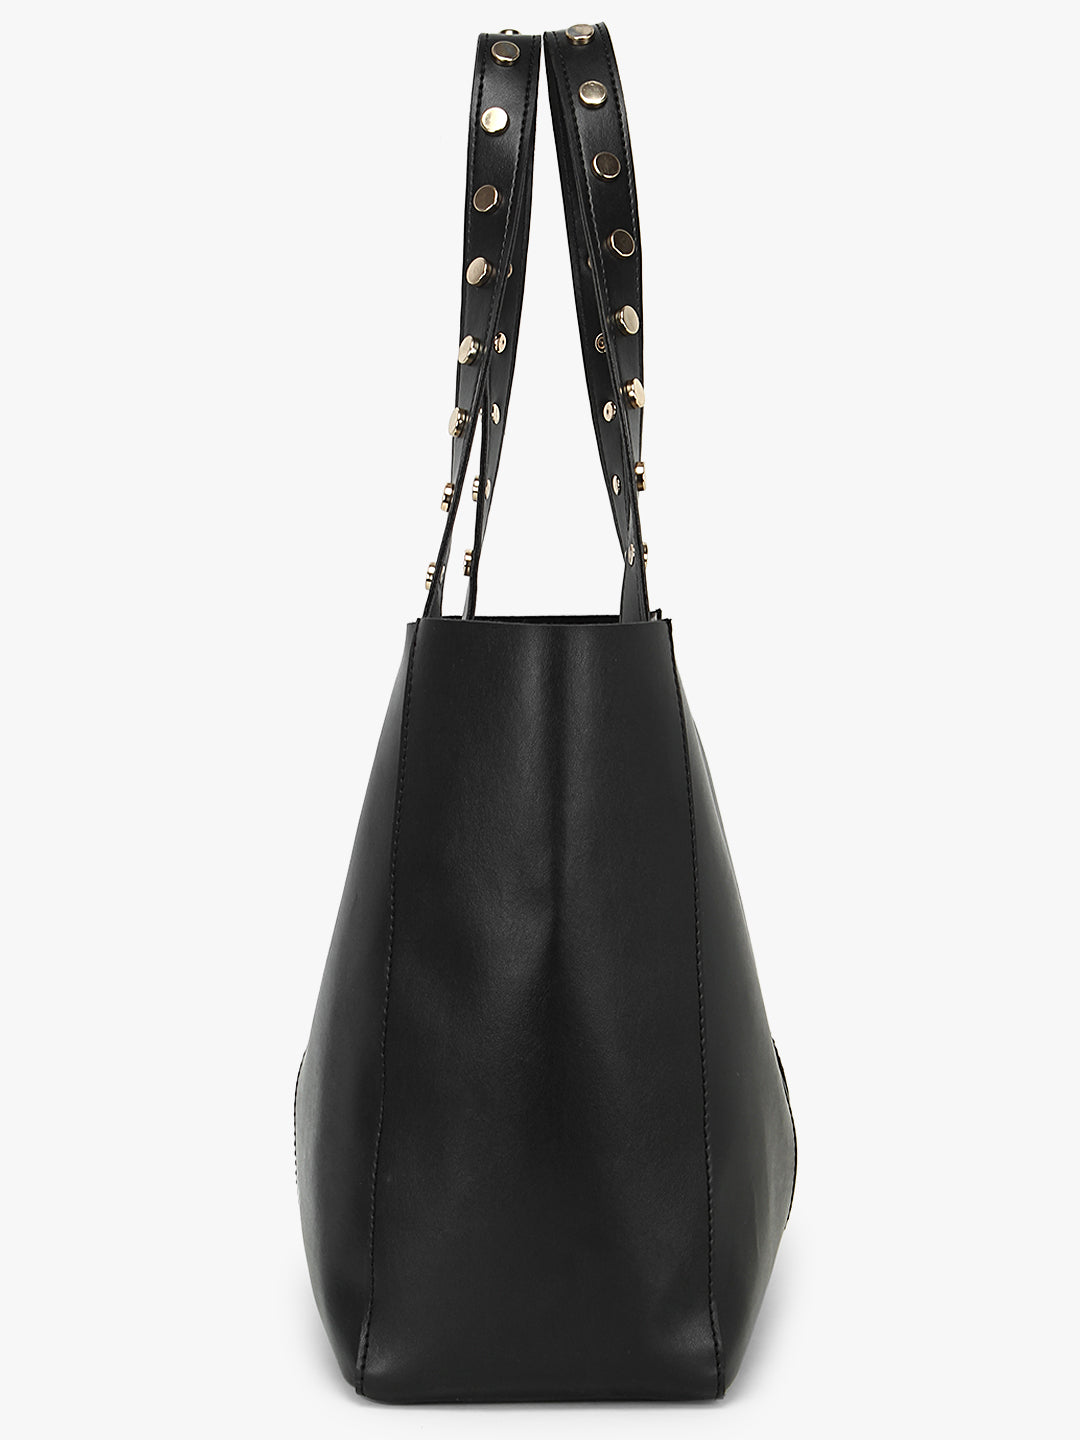 Women's Tote Bag (Black) with Embellished Handle